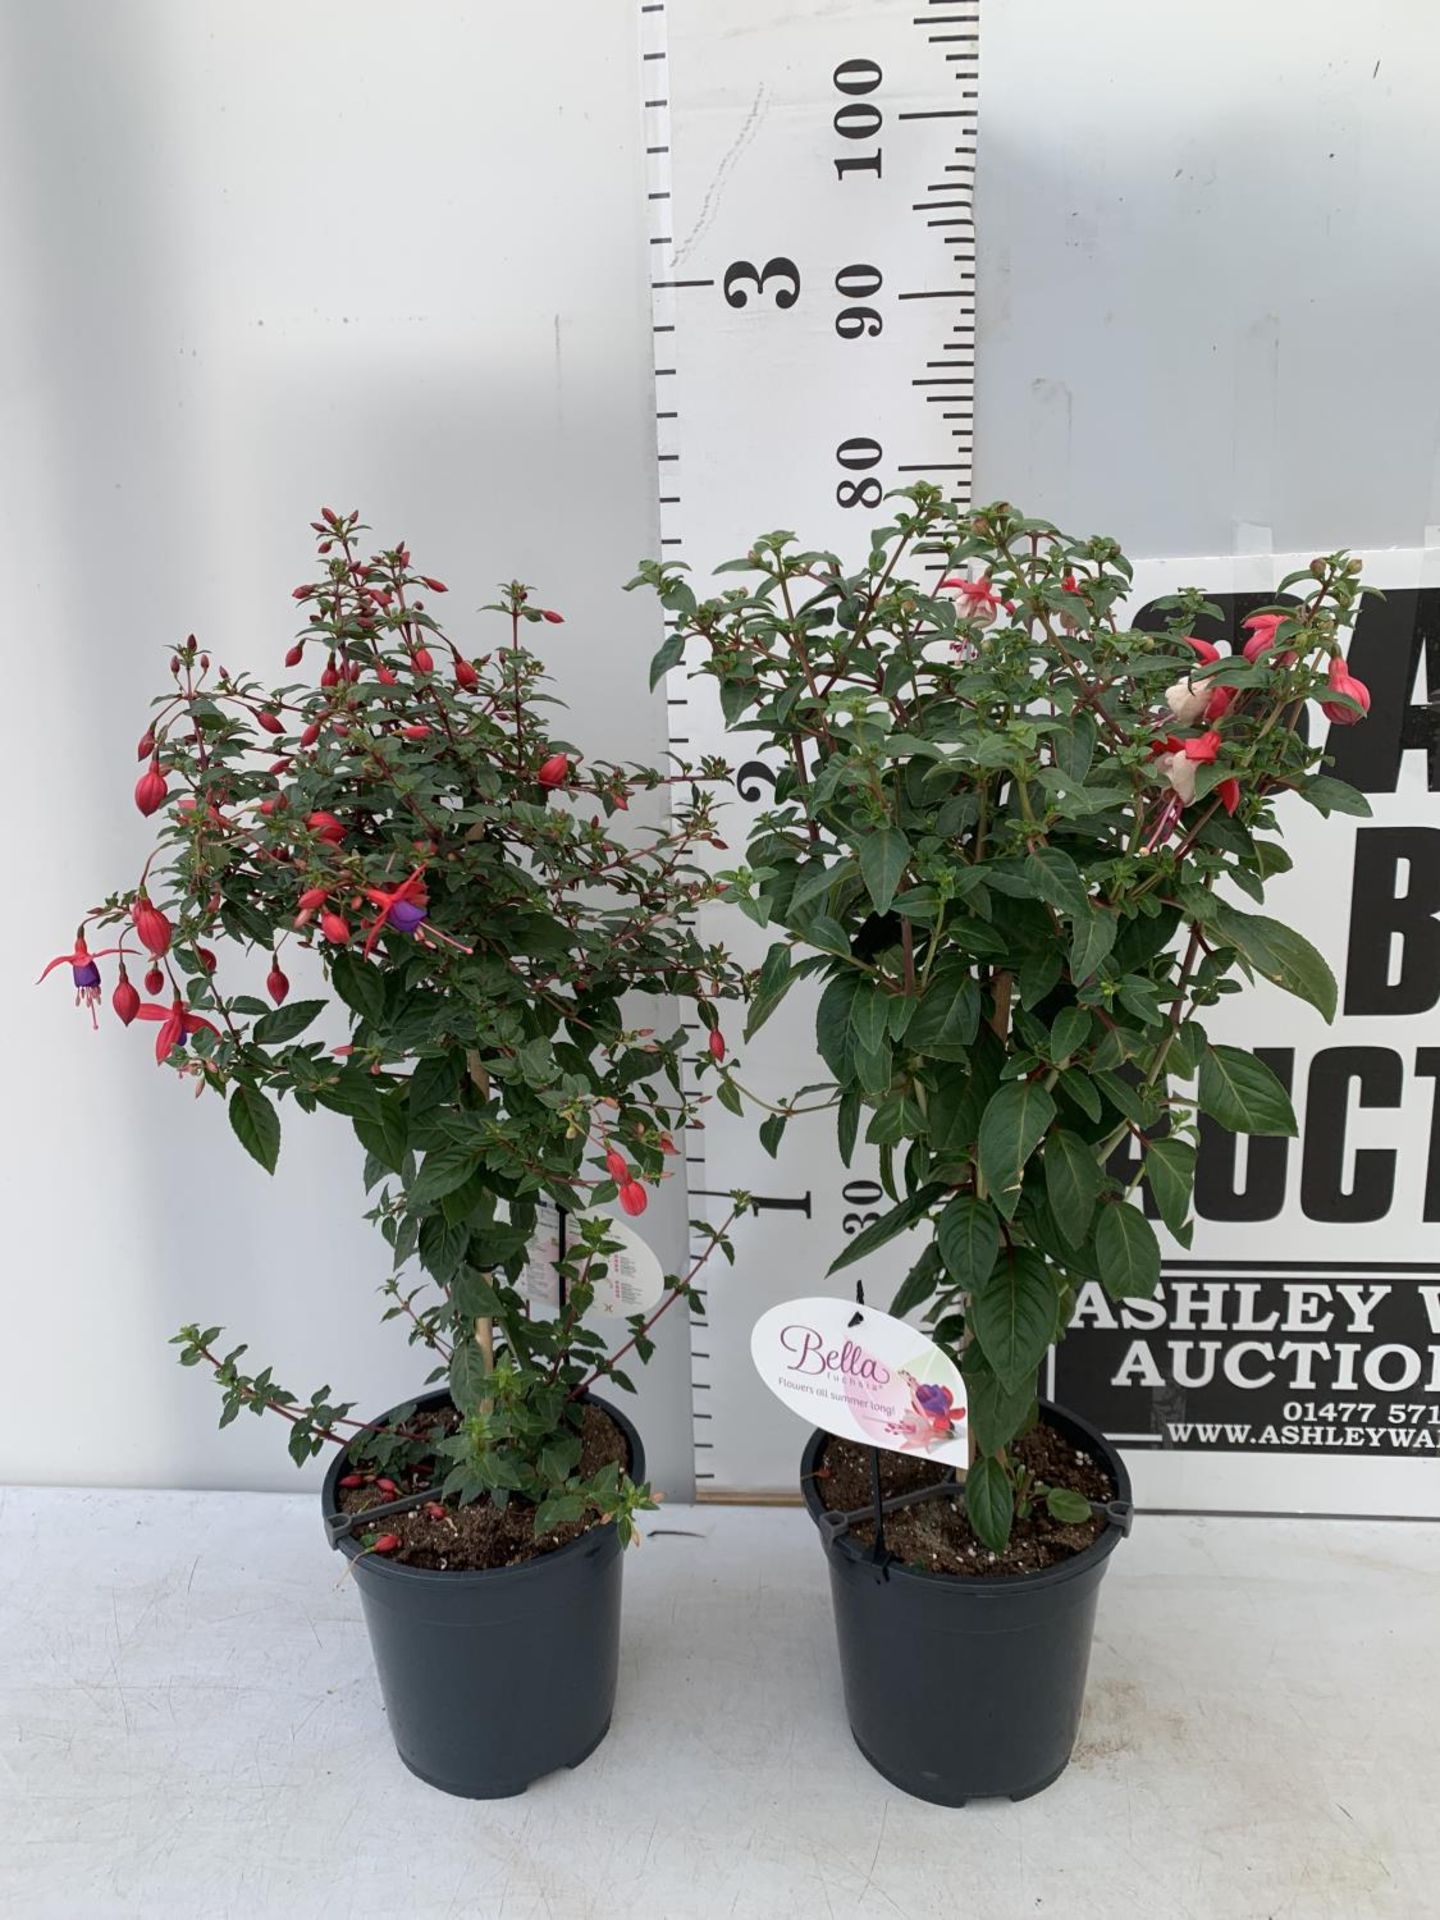 TWO BELLA STANDARD RED/WHITE AND RED/PURPLE FUCHSIA IN A 3 LTR POTS 70CM -80CM TALL TO BE SOLD FOR